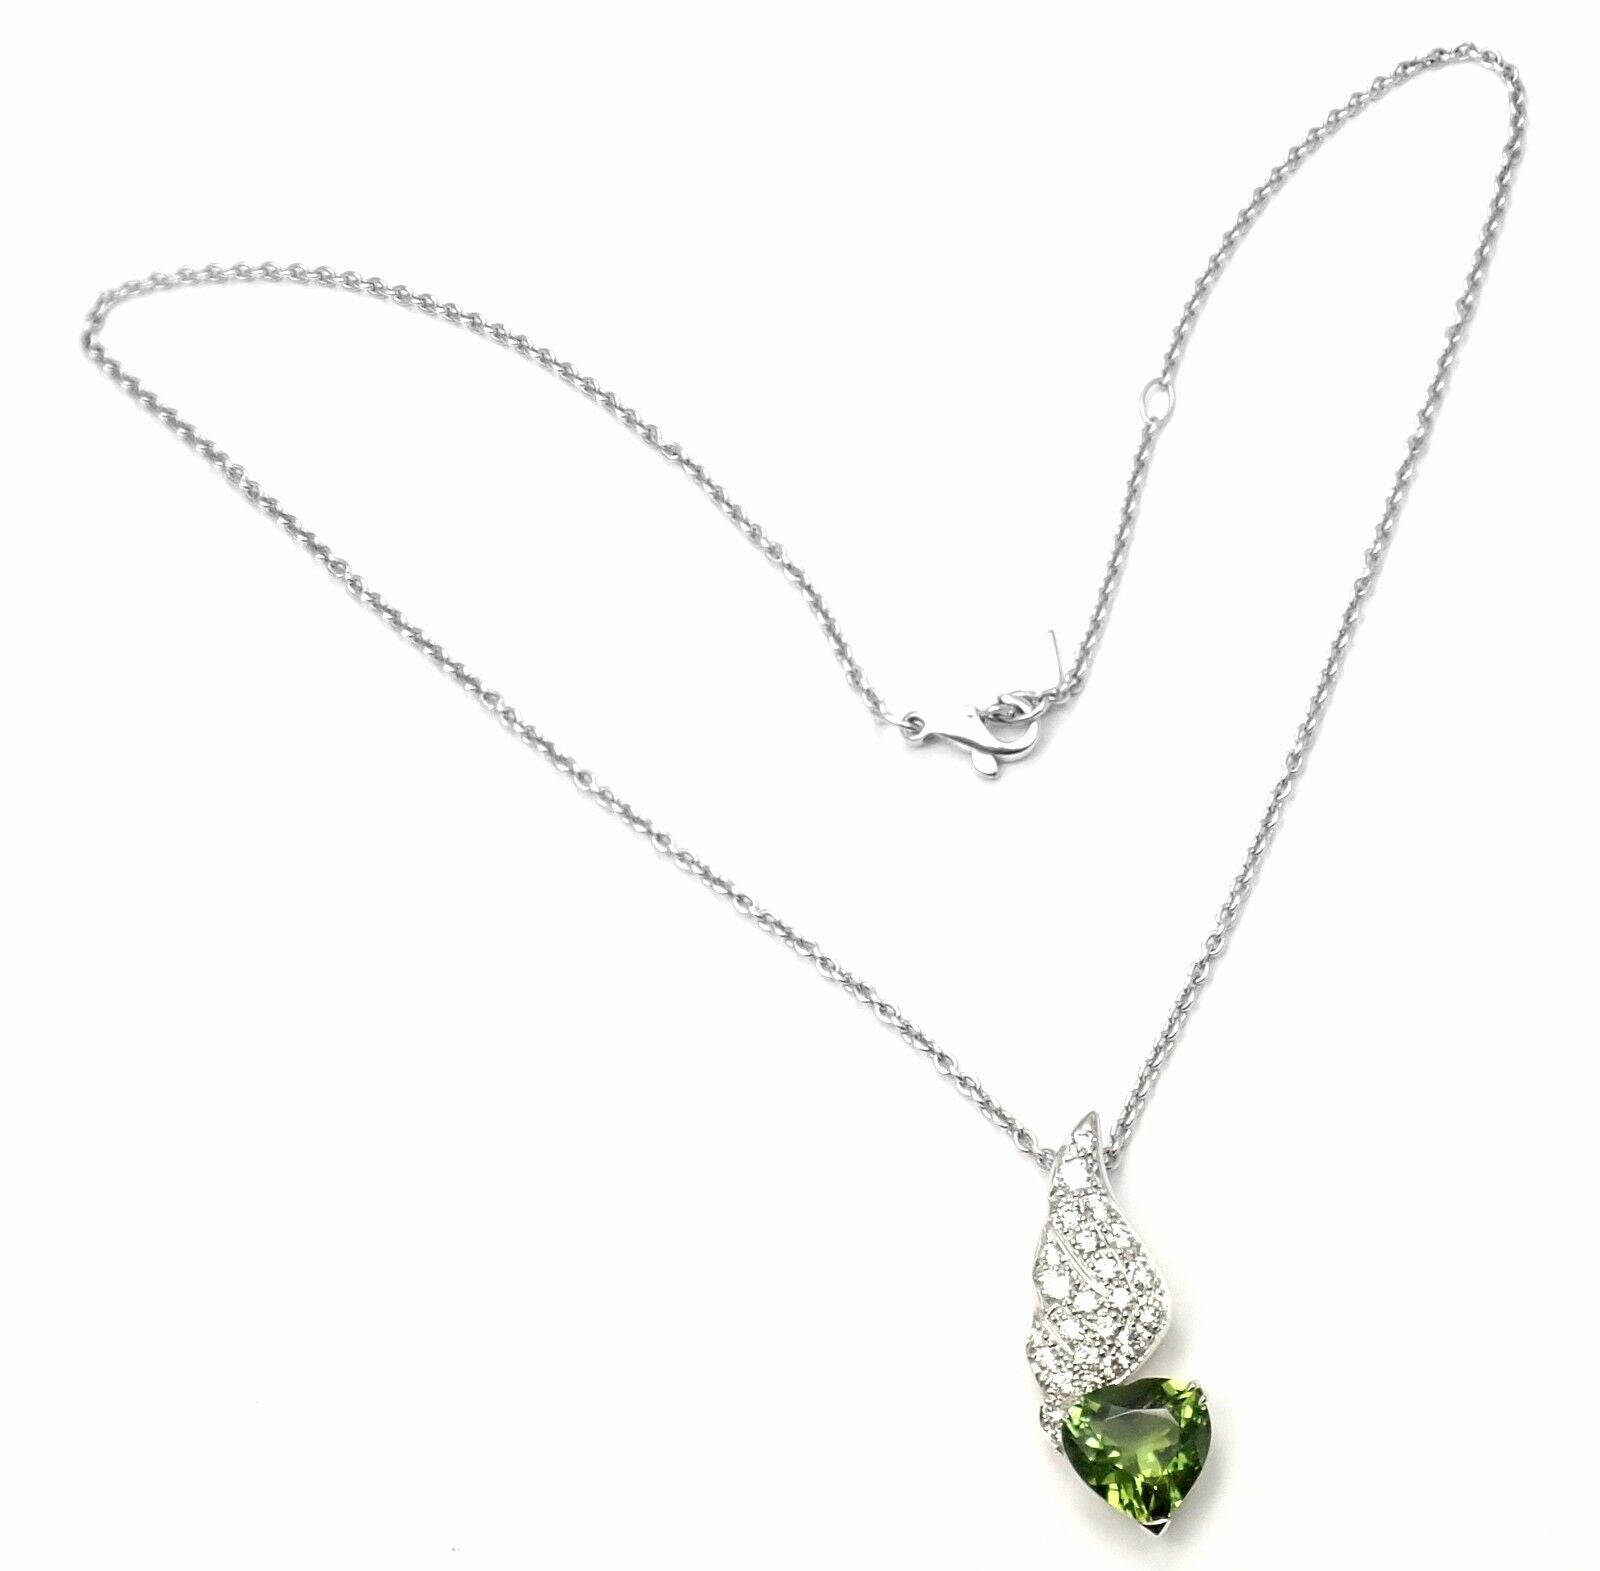 Piaget Jewelry & Watches:Fine Jewelry:Necklaces & Pendants Rare! Authentic Piaget 18k White Gold Diamond Peridot Heart Pendant Necklace